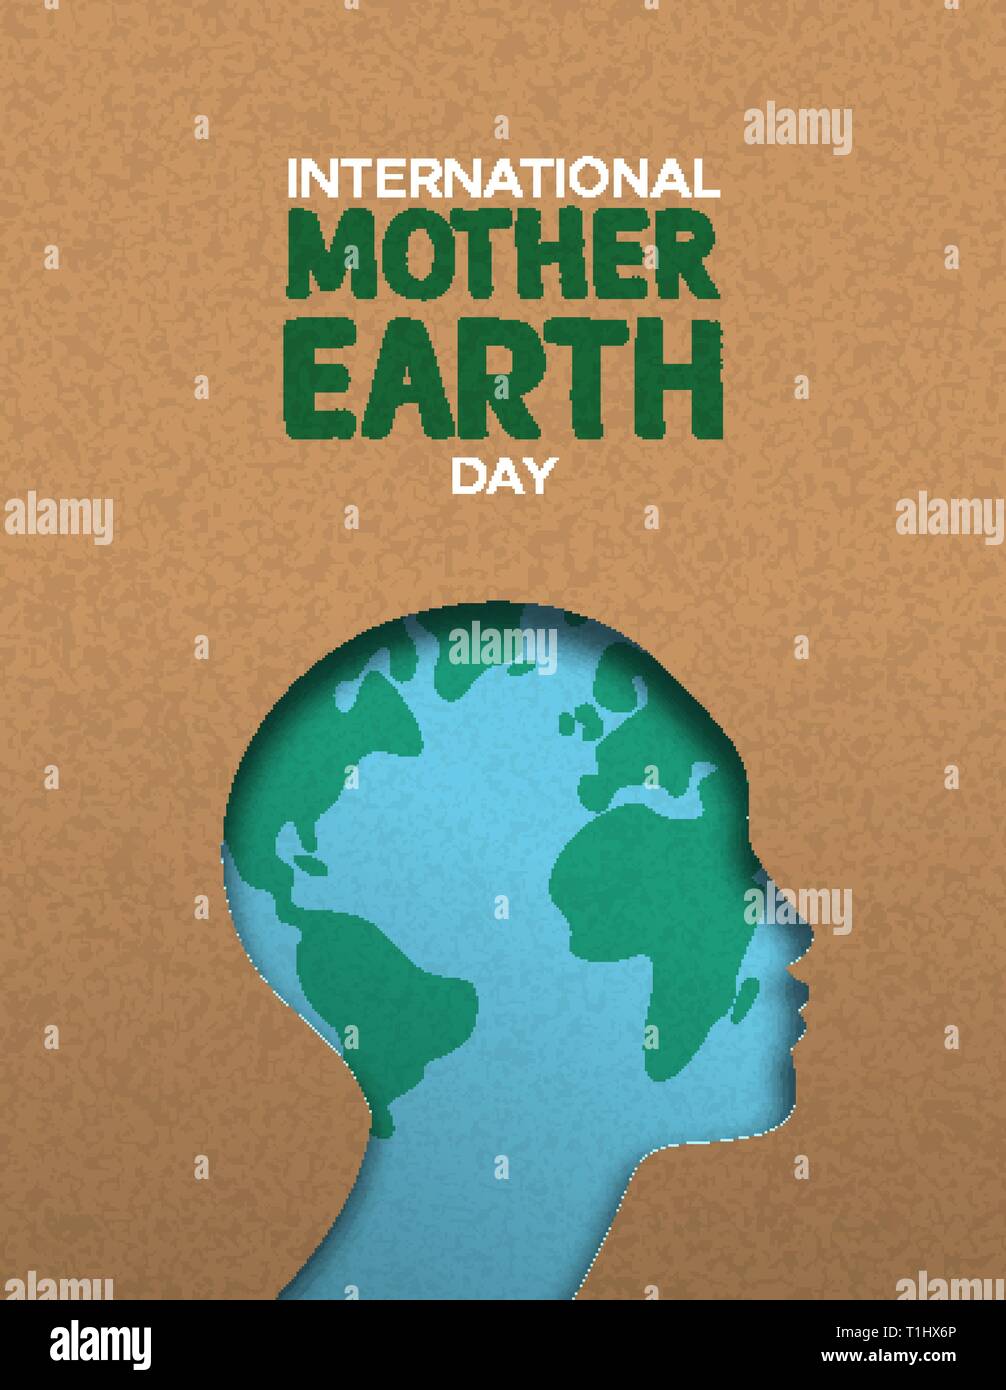 International Mother Earth Day poster illustration of papercut woman head with world map inside. Recycled paper cutout for environment conservation aw Stock Vector